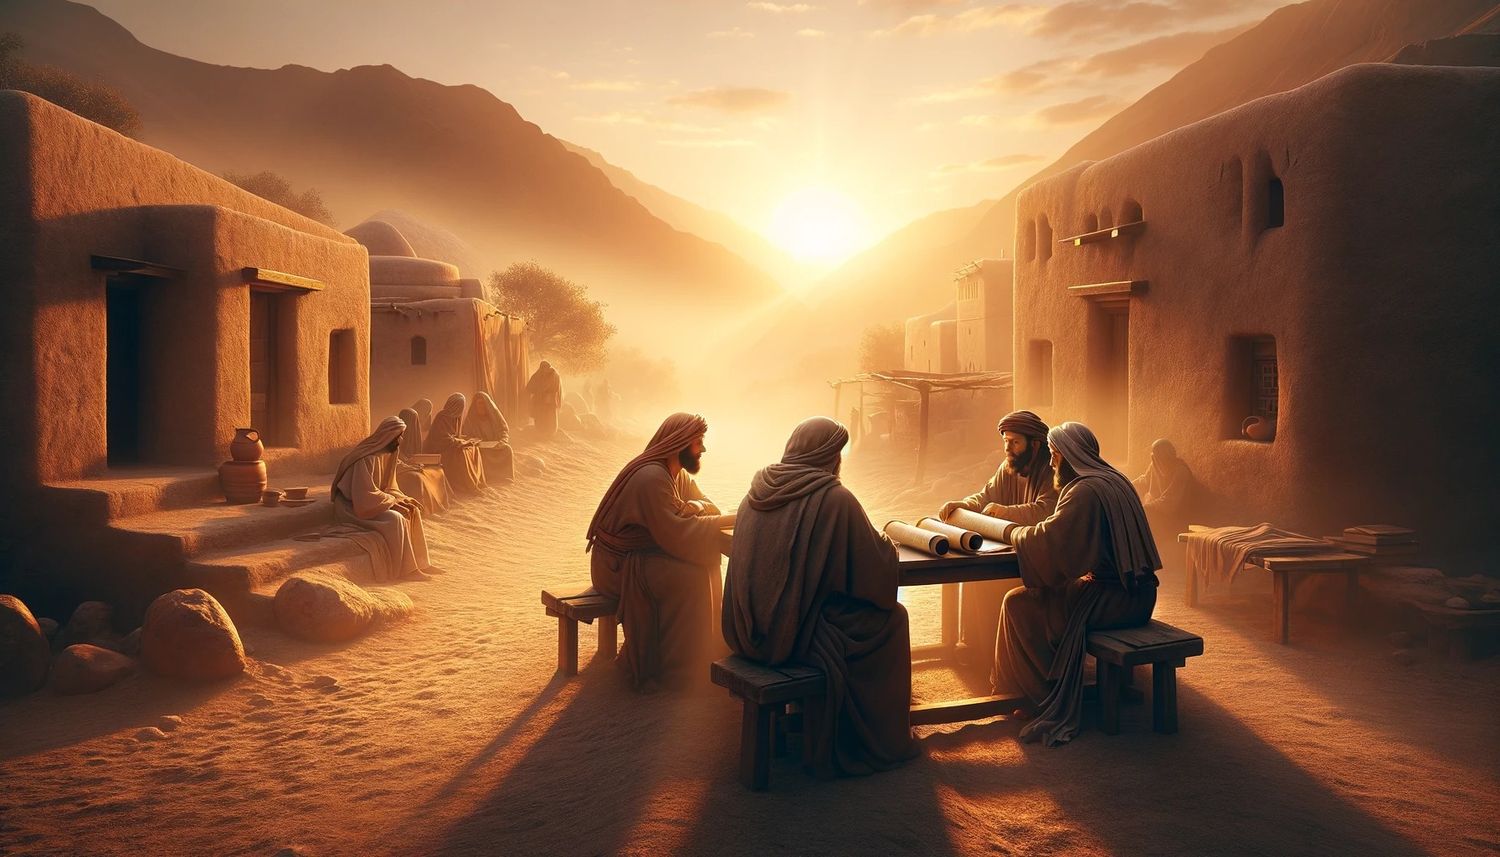 Why Are Matthew, Mark, And Luke Called The Synoptic Gospels?